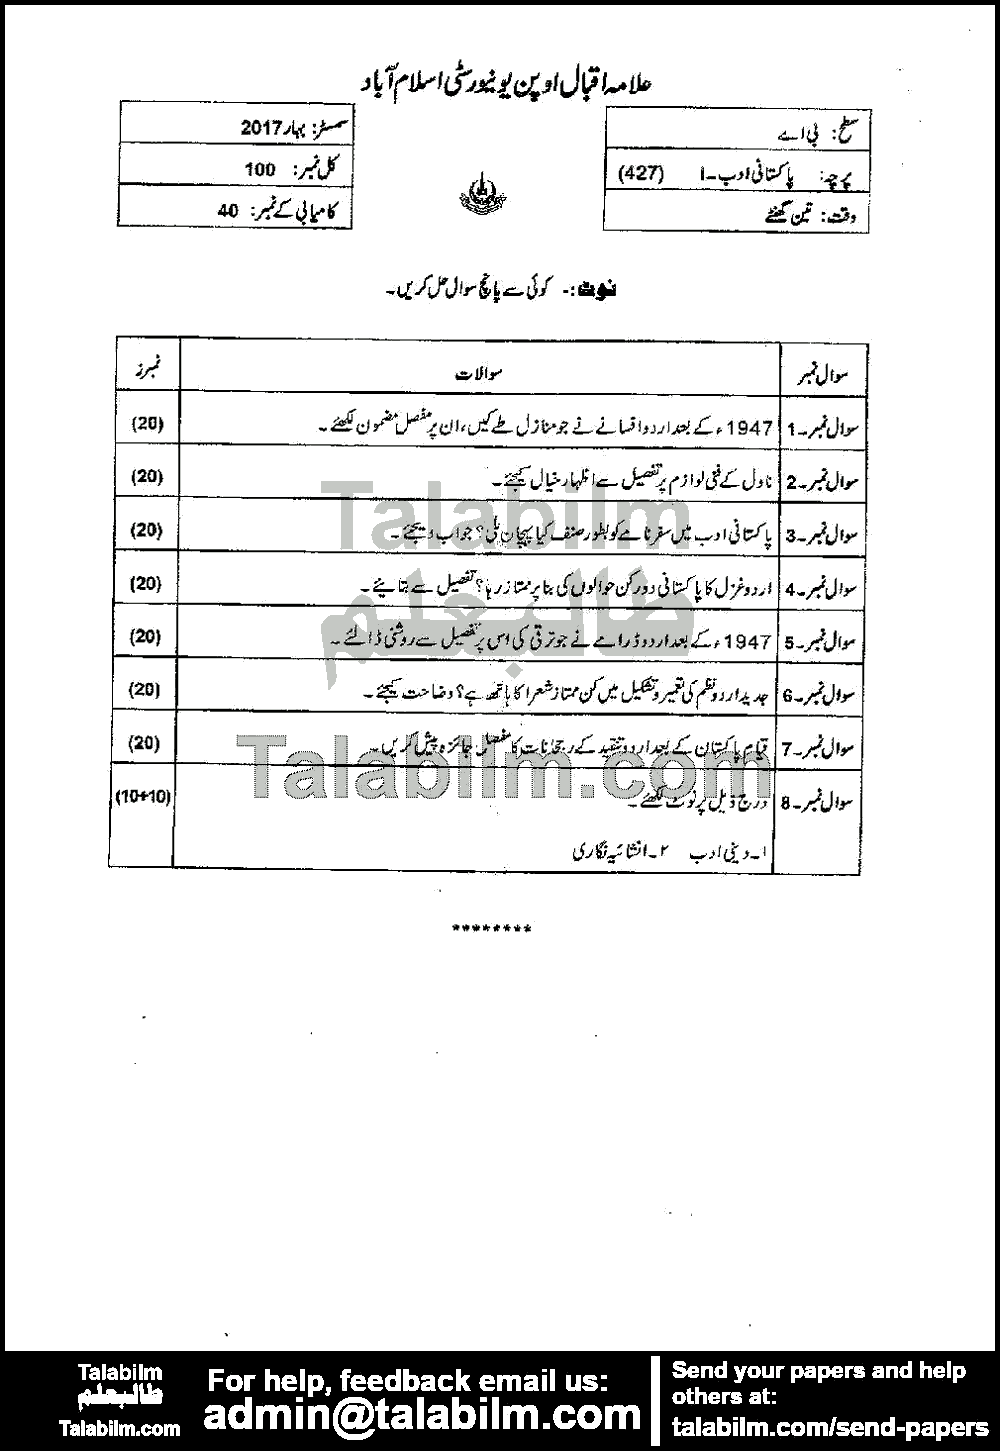 Pakistani Adab-I 427 past paper for Spring 2017